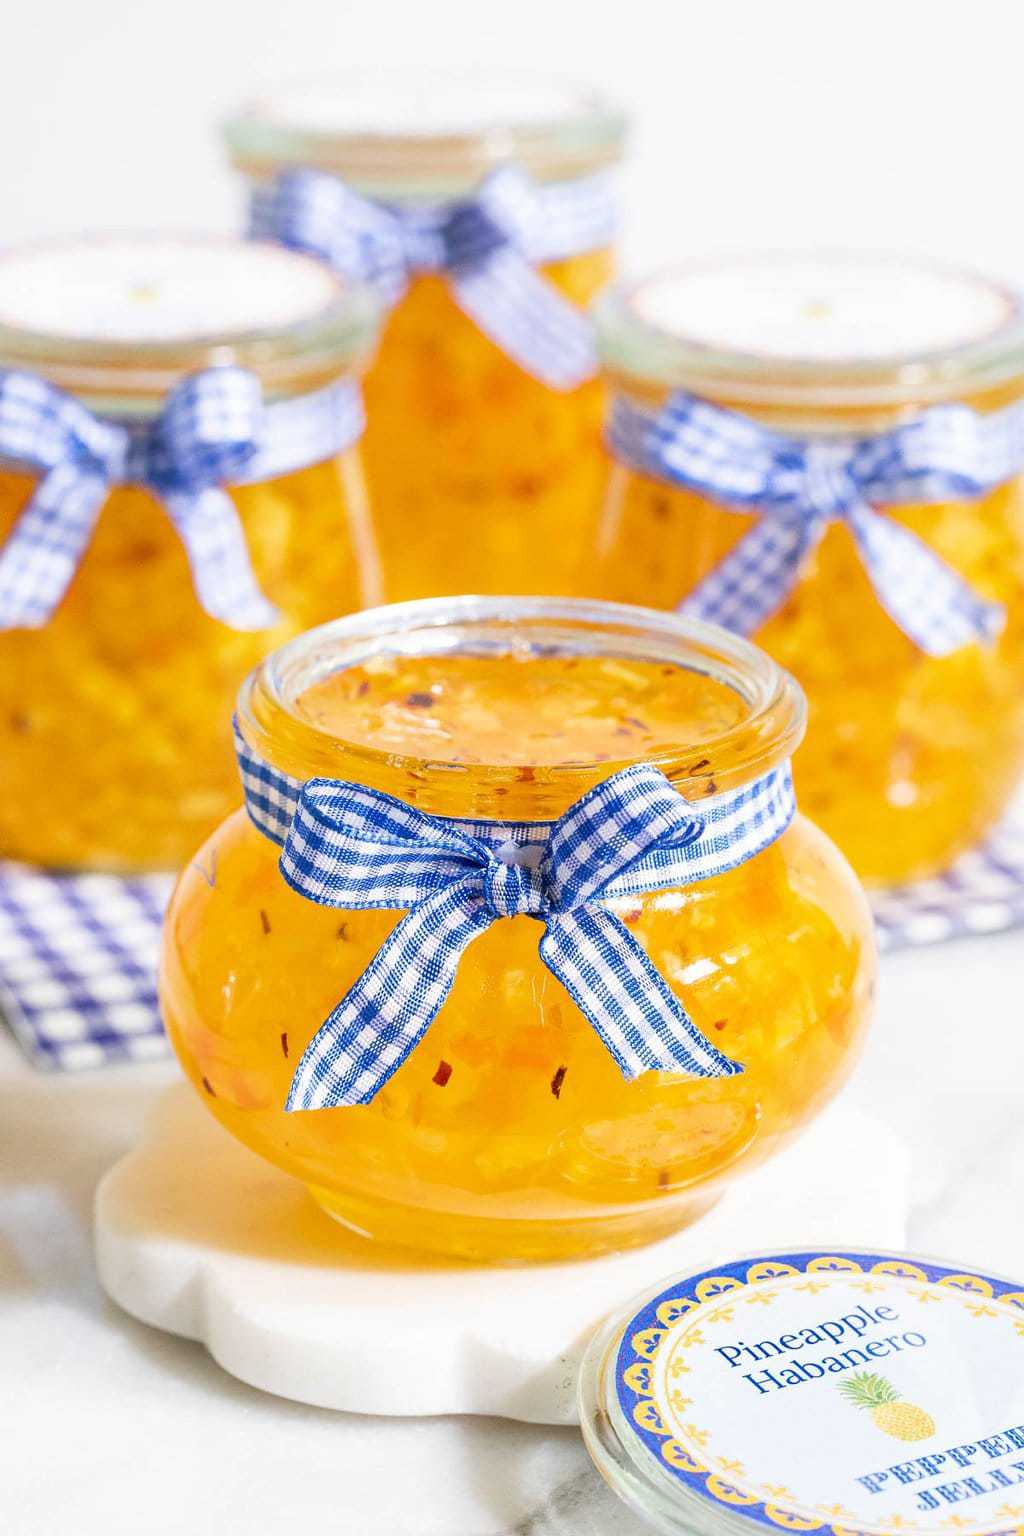 Vertical photo of Pineapple Habanero Pepper Jelly in small glass jars with blue and white ribbon bows and custom labels.